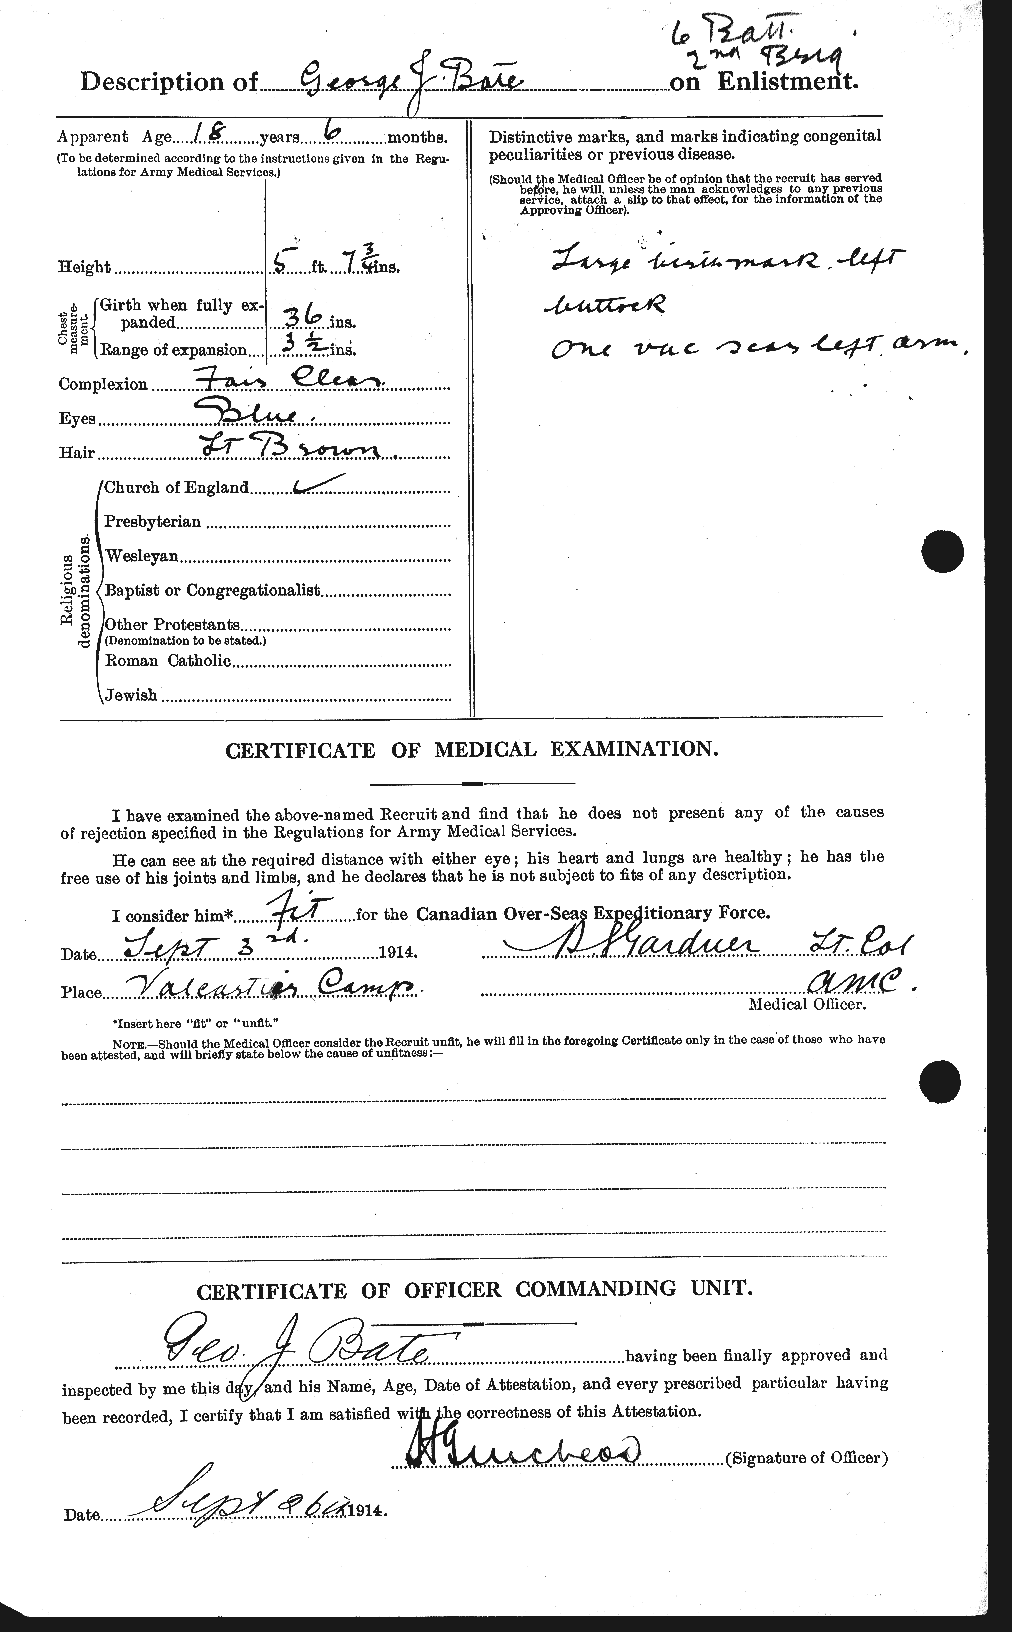 Personnel Records of the First World War - CEF 228102b